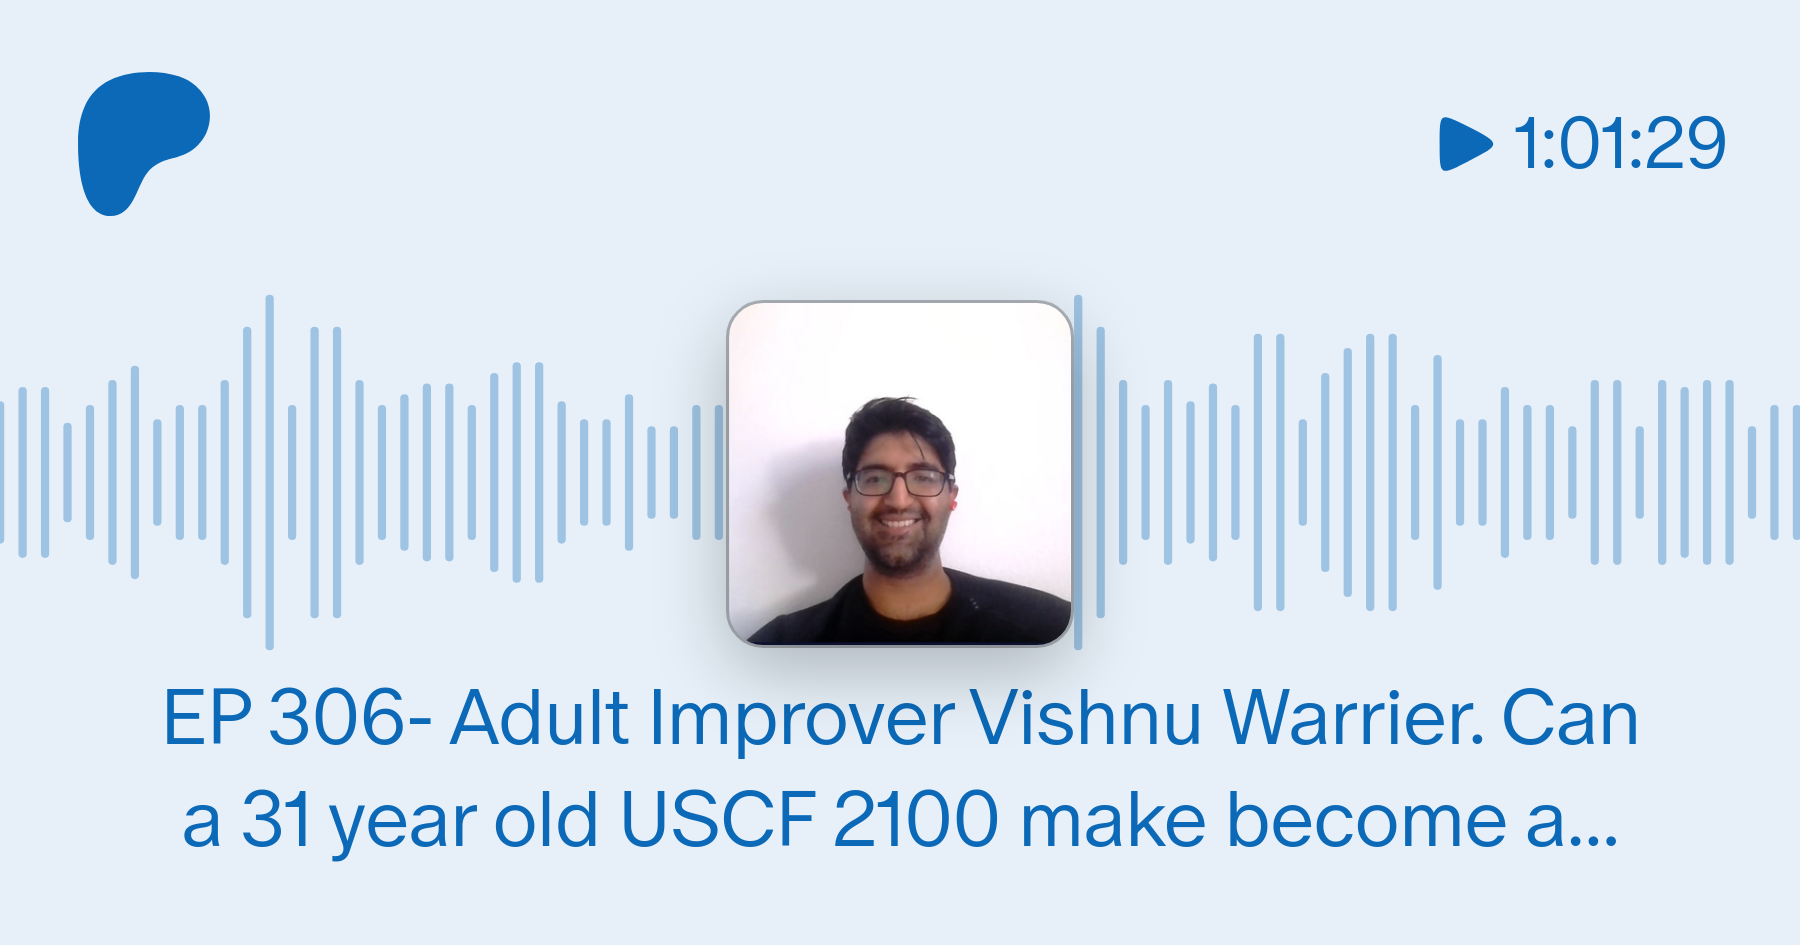 EP 306- Adult Improver Vishnu Warrier. Can a 31 year old USCF 2100 become a  GM? Vishnu wants to find out! — The Perpetual Chess Podcast